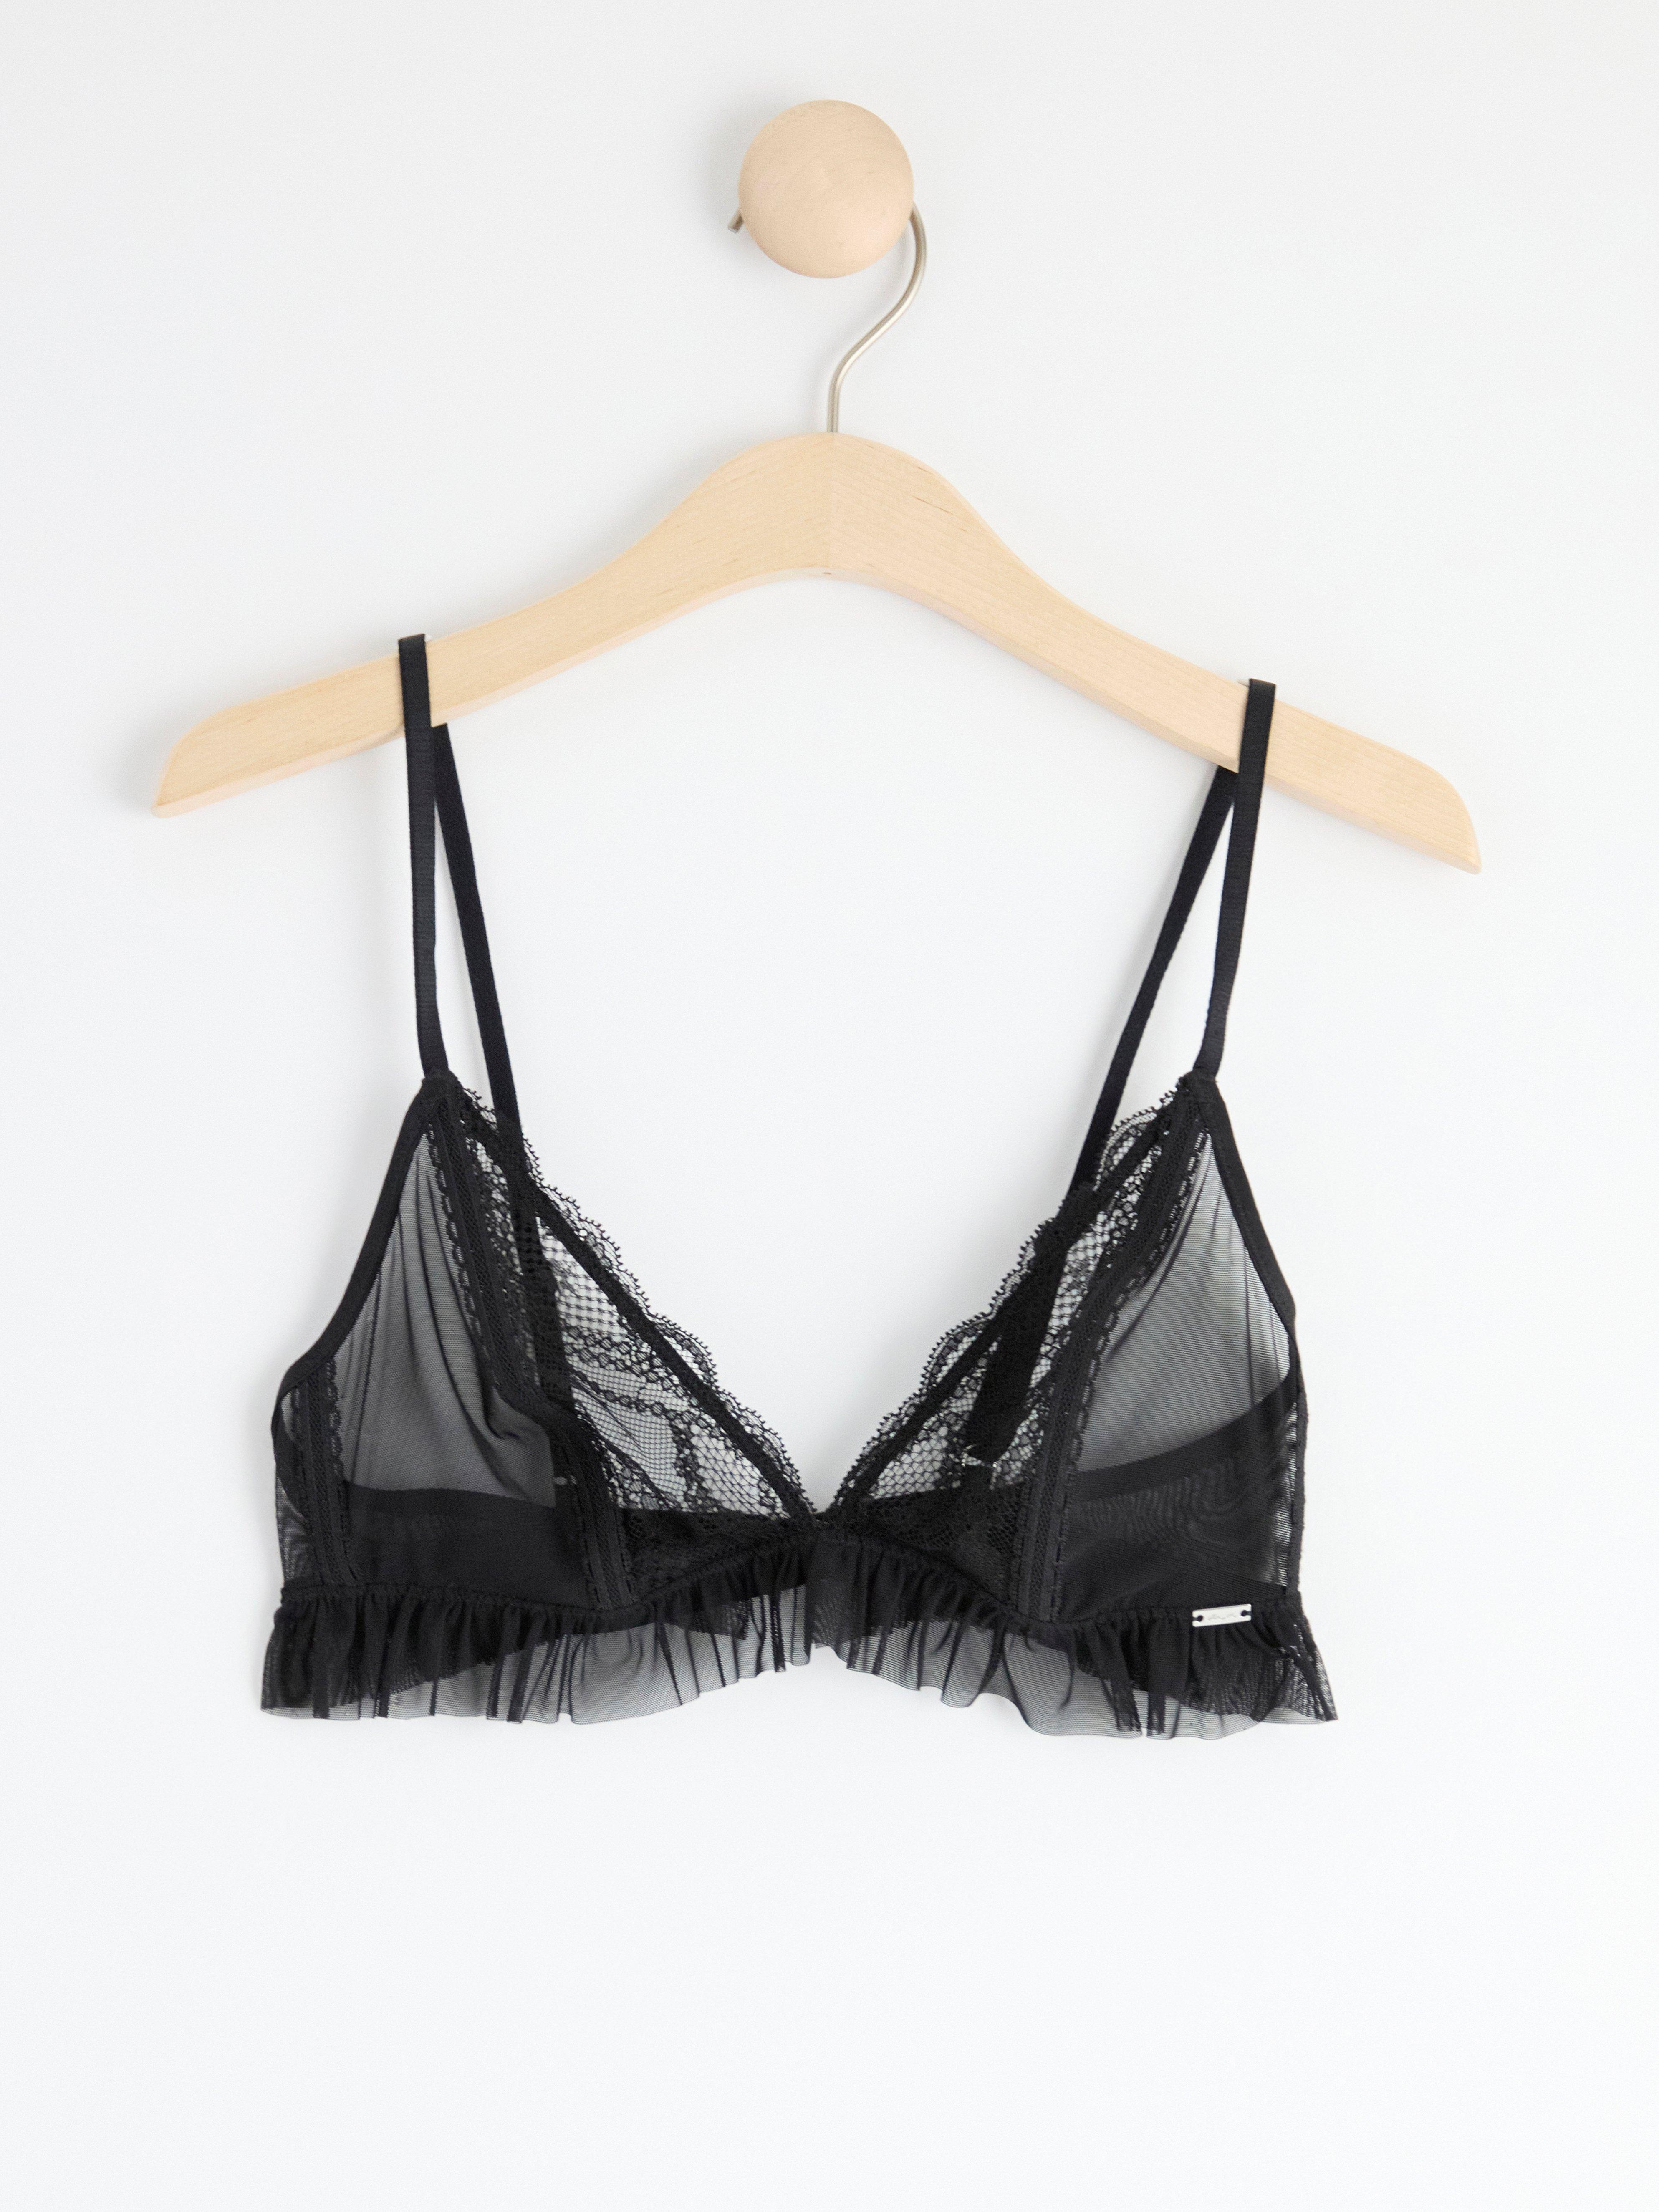 Unpadded bralette with lace